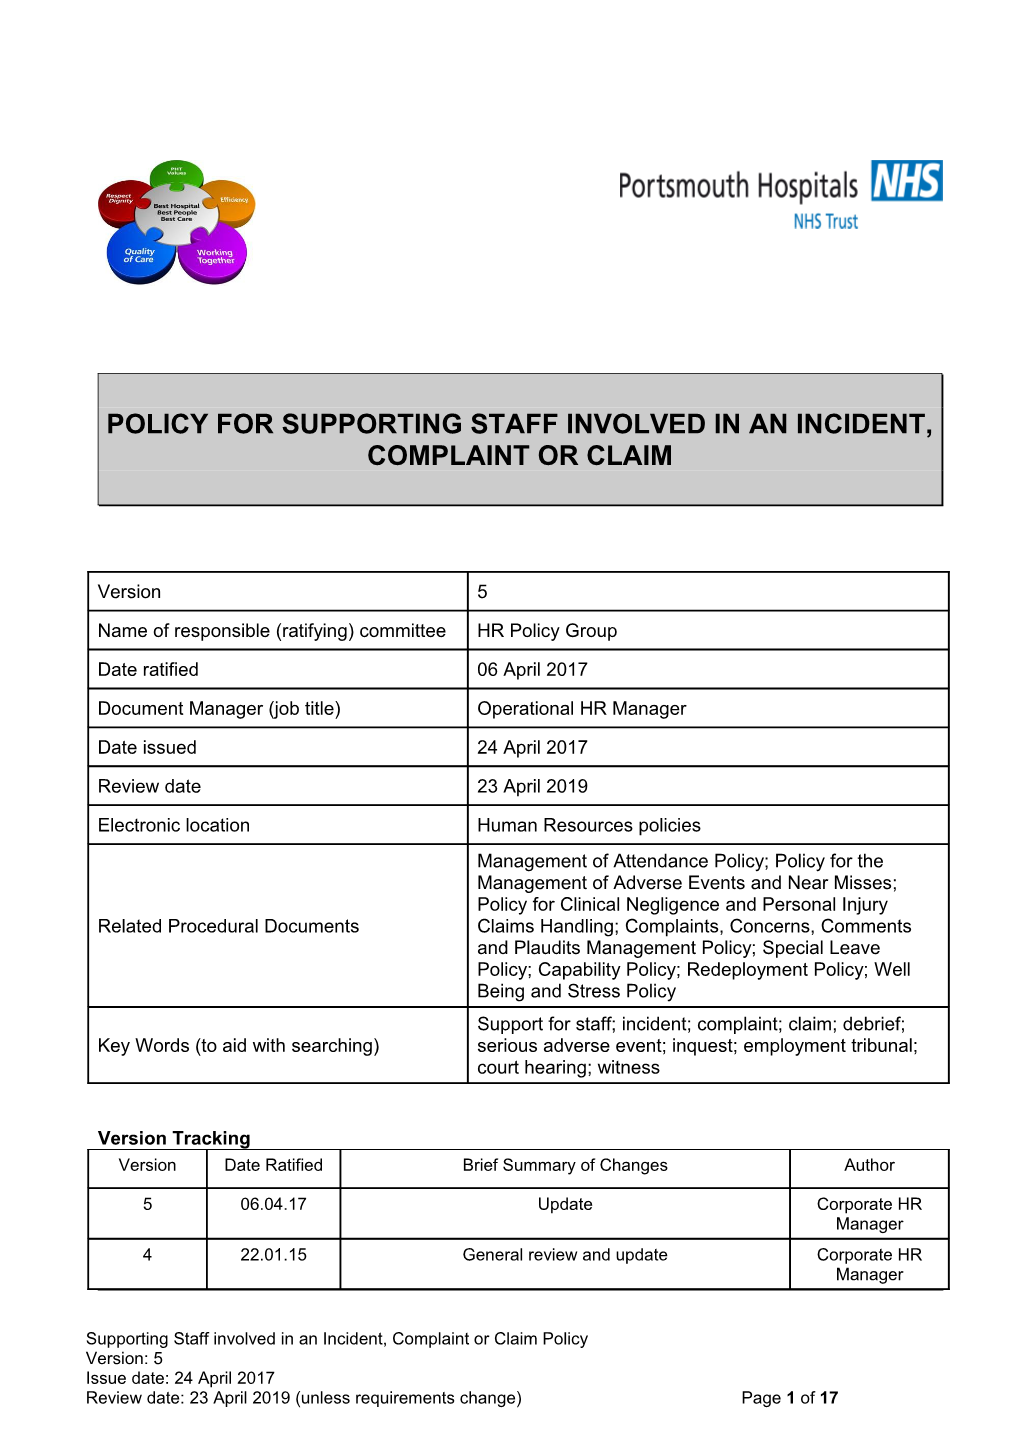 Policy for Supporting Staff Involved in an Incident, Complaint Or Claim